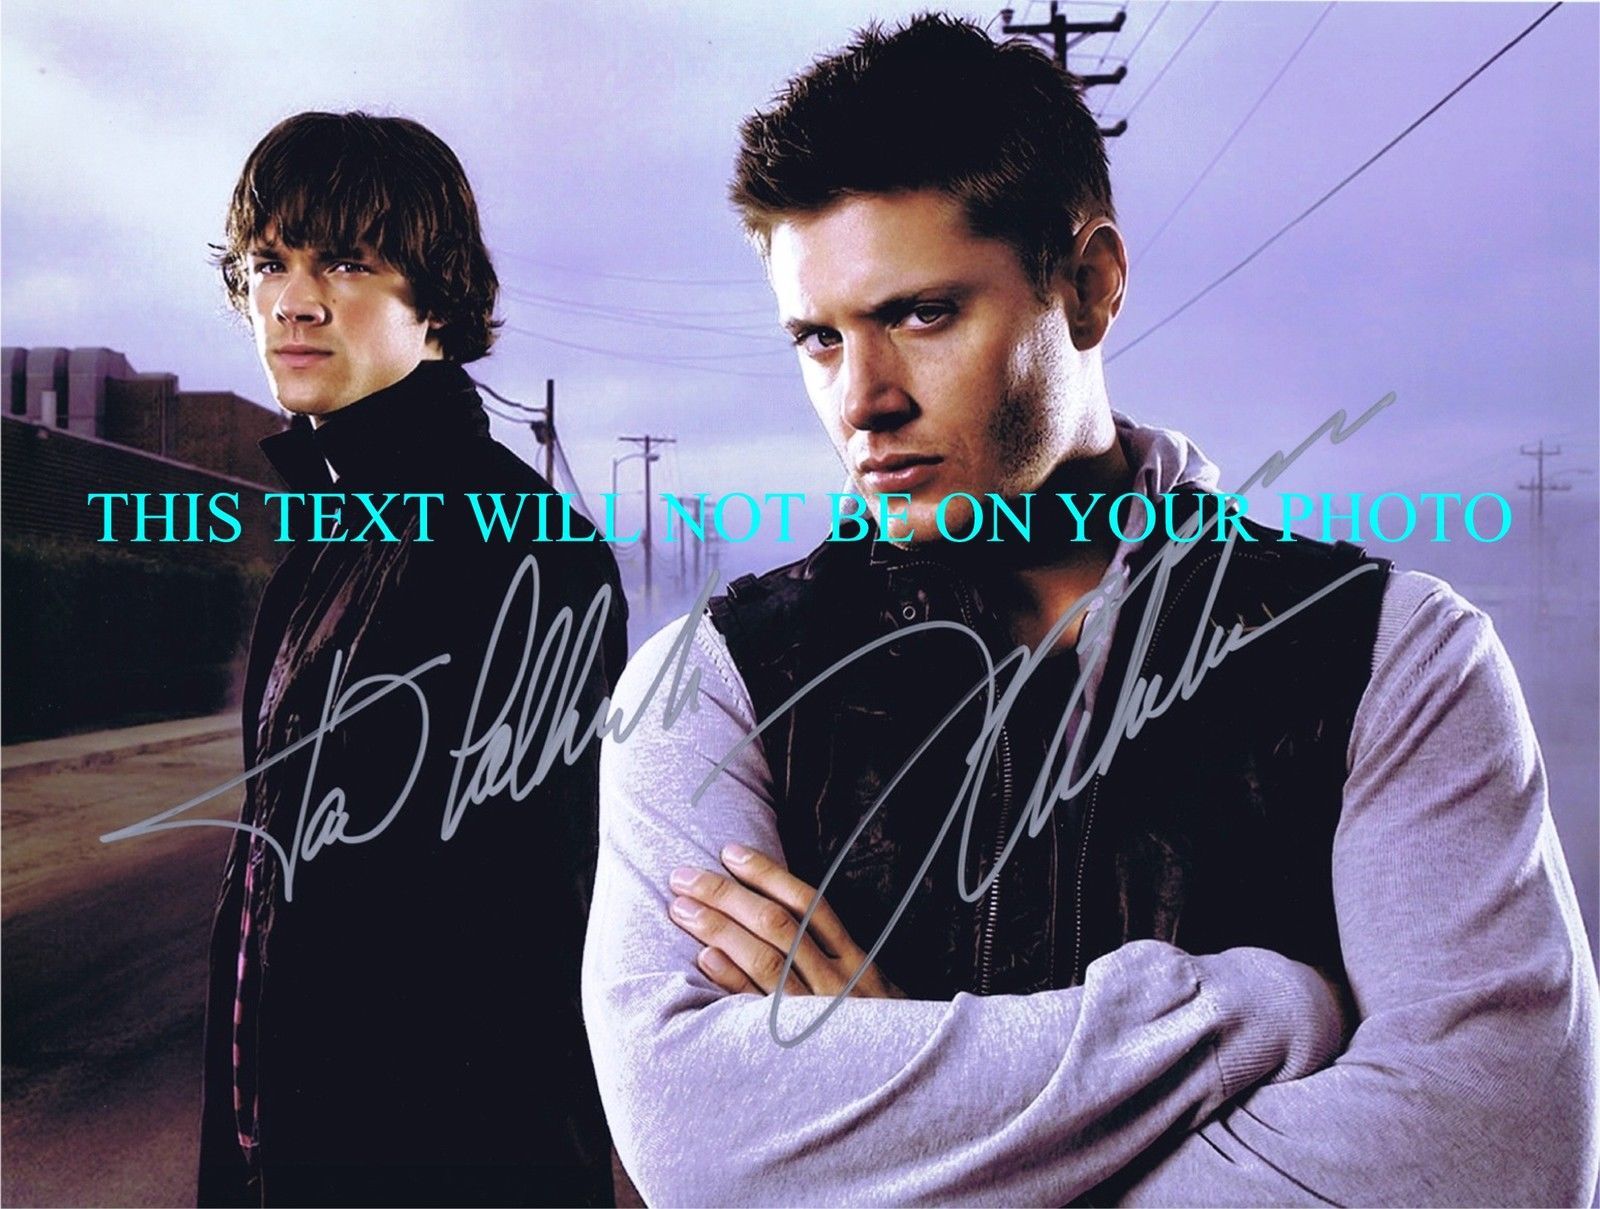 Primary image for SUPERNATURAL CAST JARED PADALECKI AND JENSEN ACKLES AUTOGRAPHED 8x10 RP PHOTO